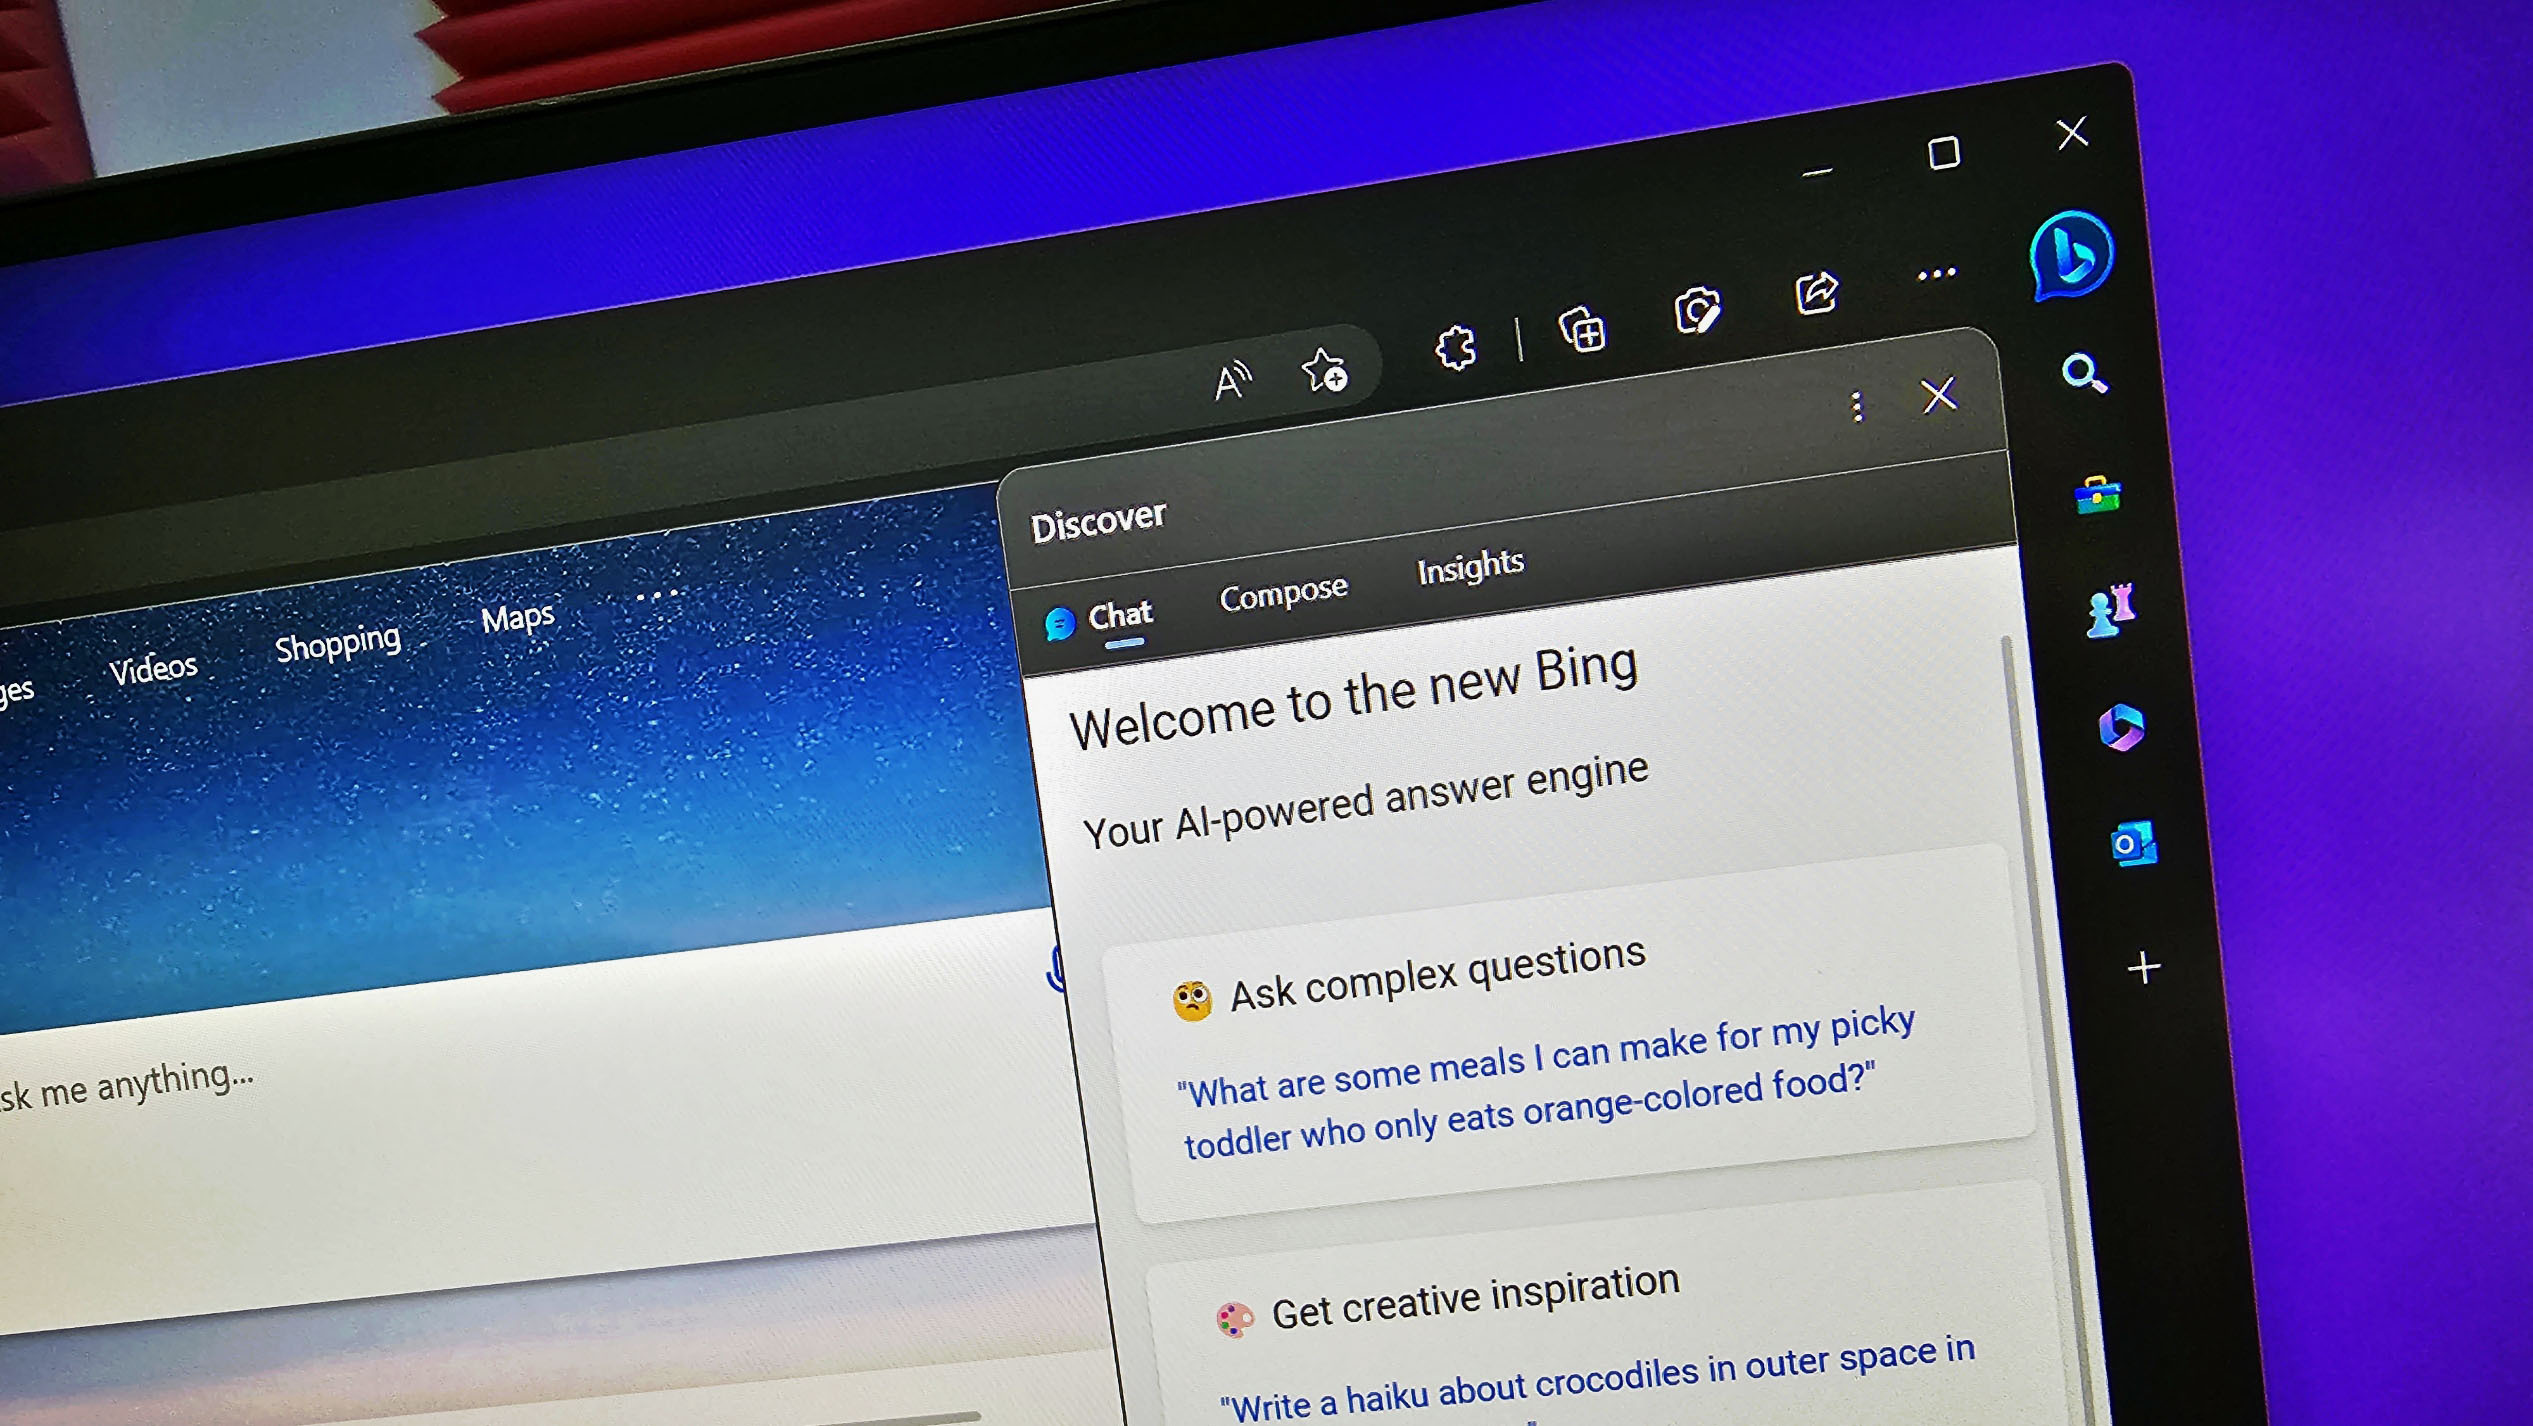 Microsoft adds sidebar with Bing chatbot to Edge